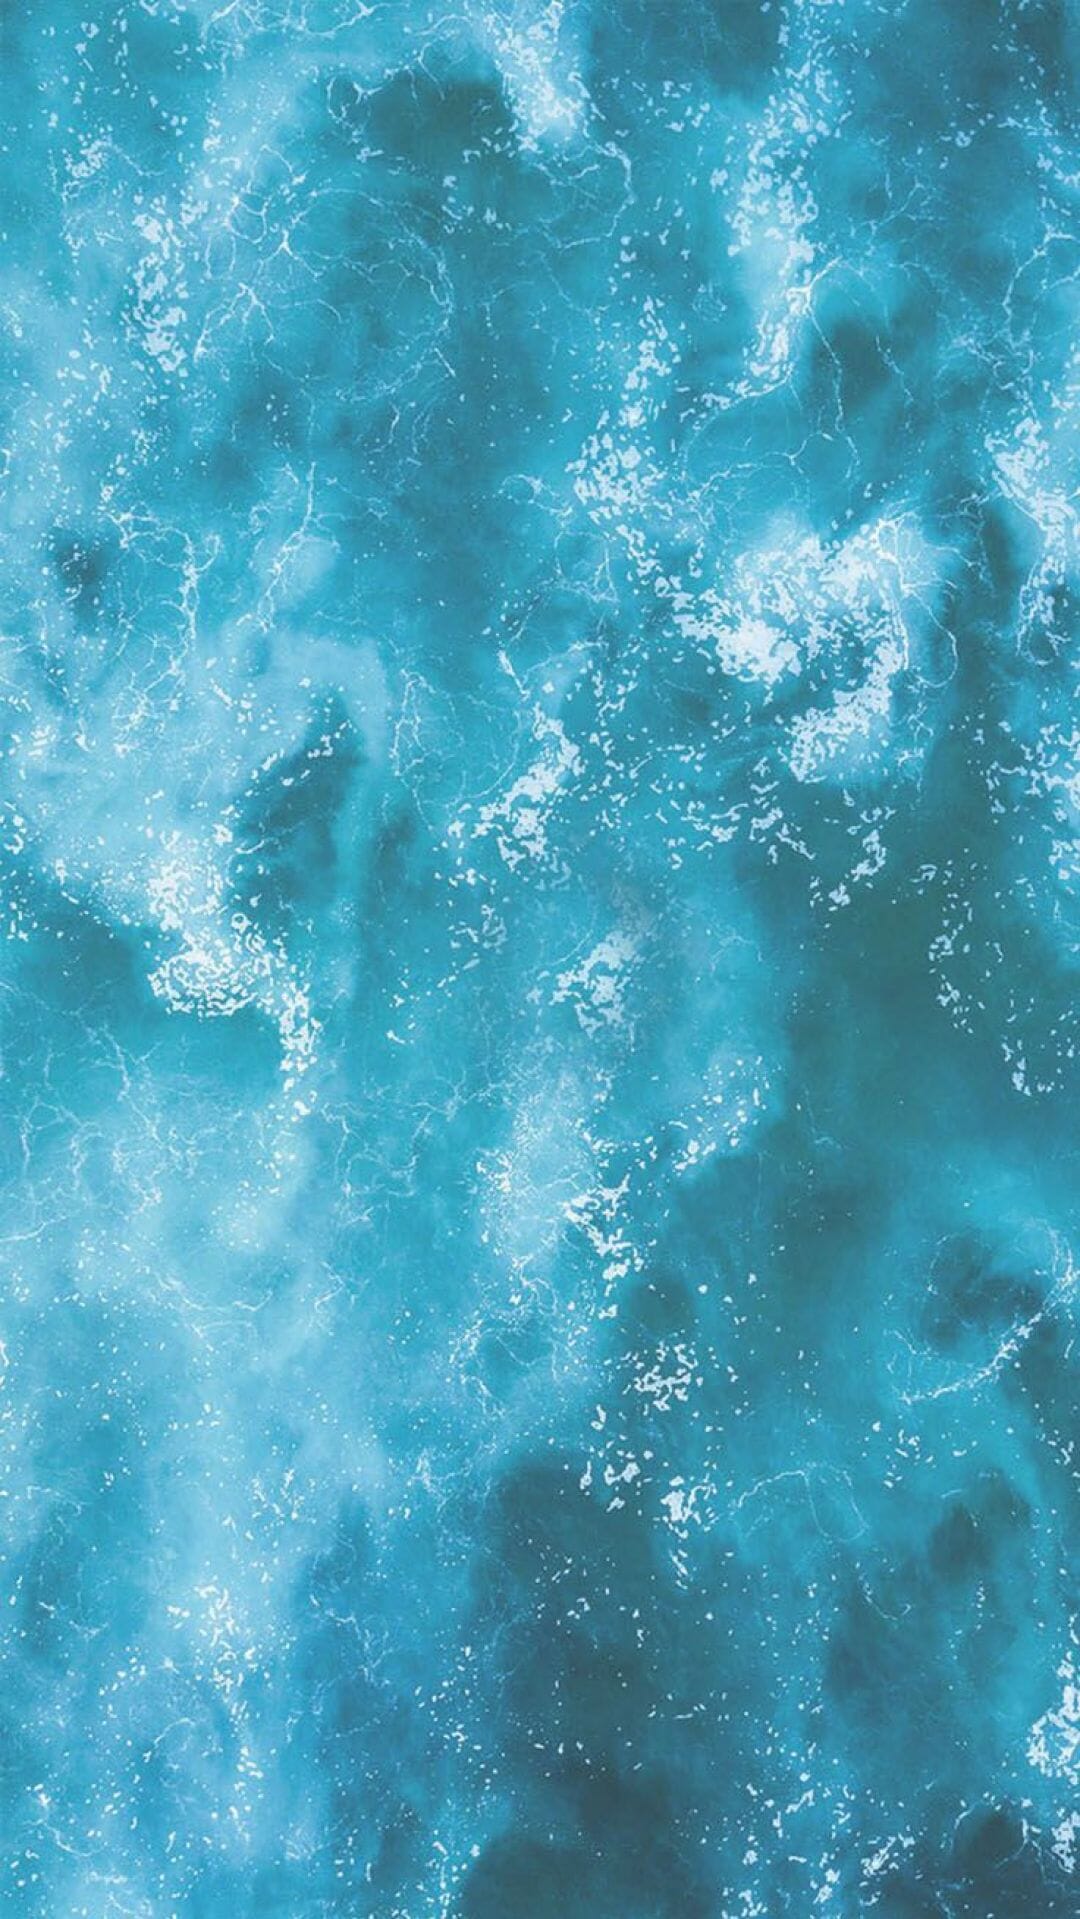 An aerial view of a blue ocean with waves - Teal, turquoise